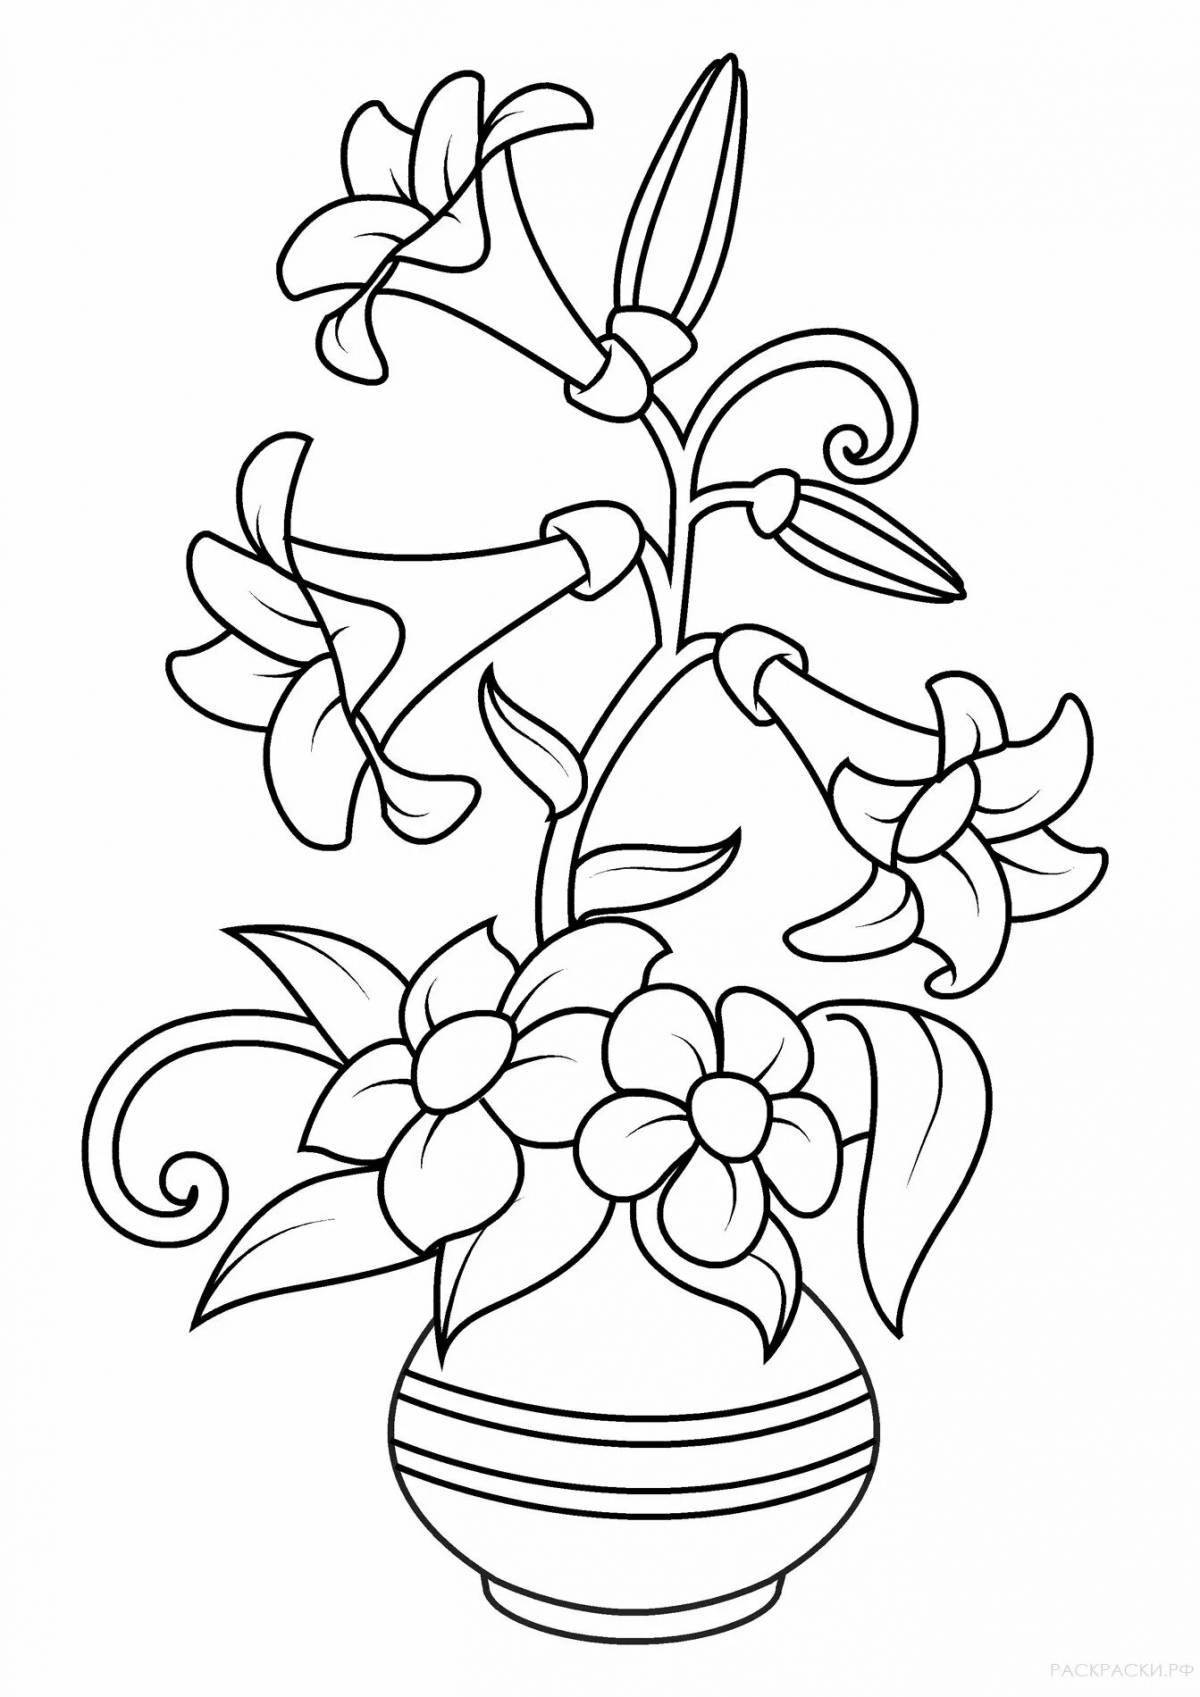 Coloring page cheerful bouquet of flowers in a vase